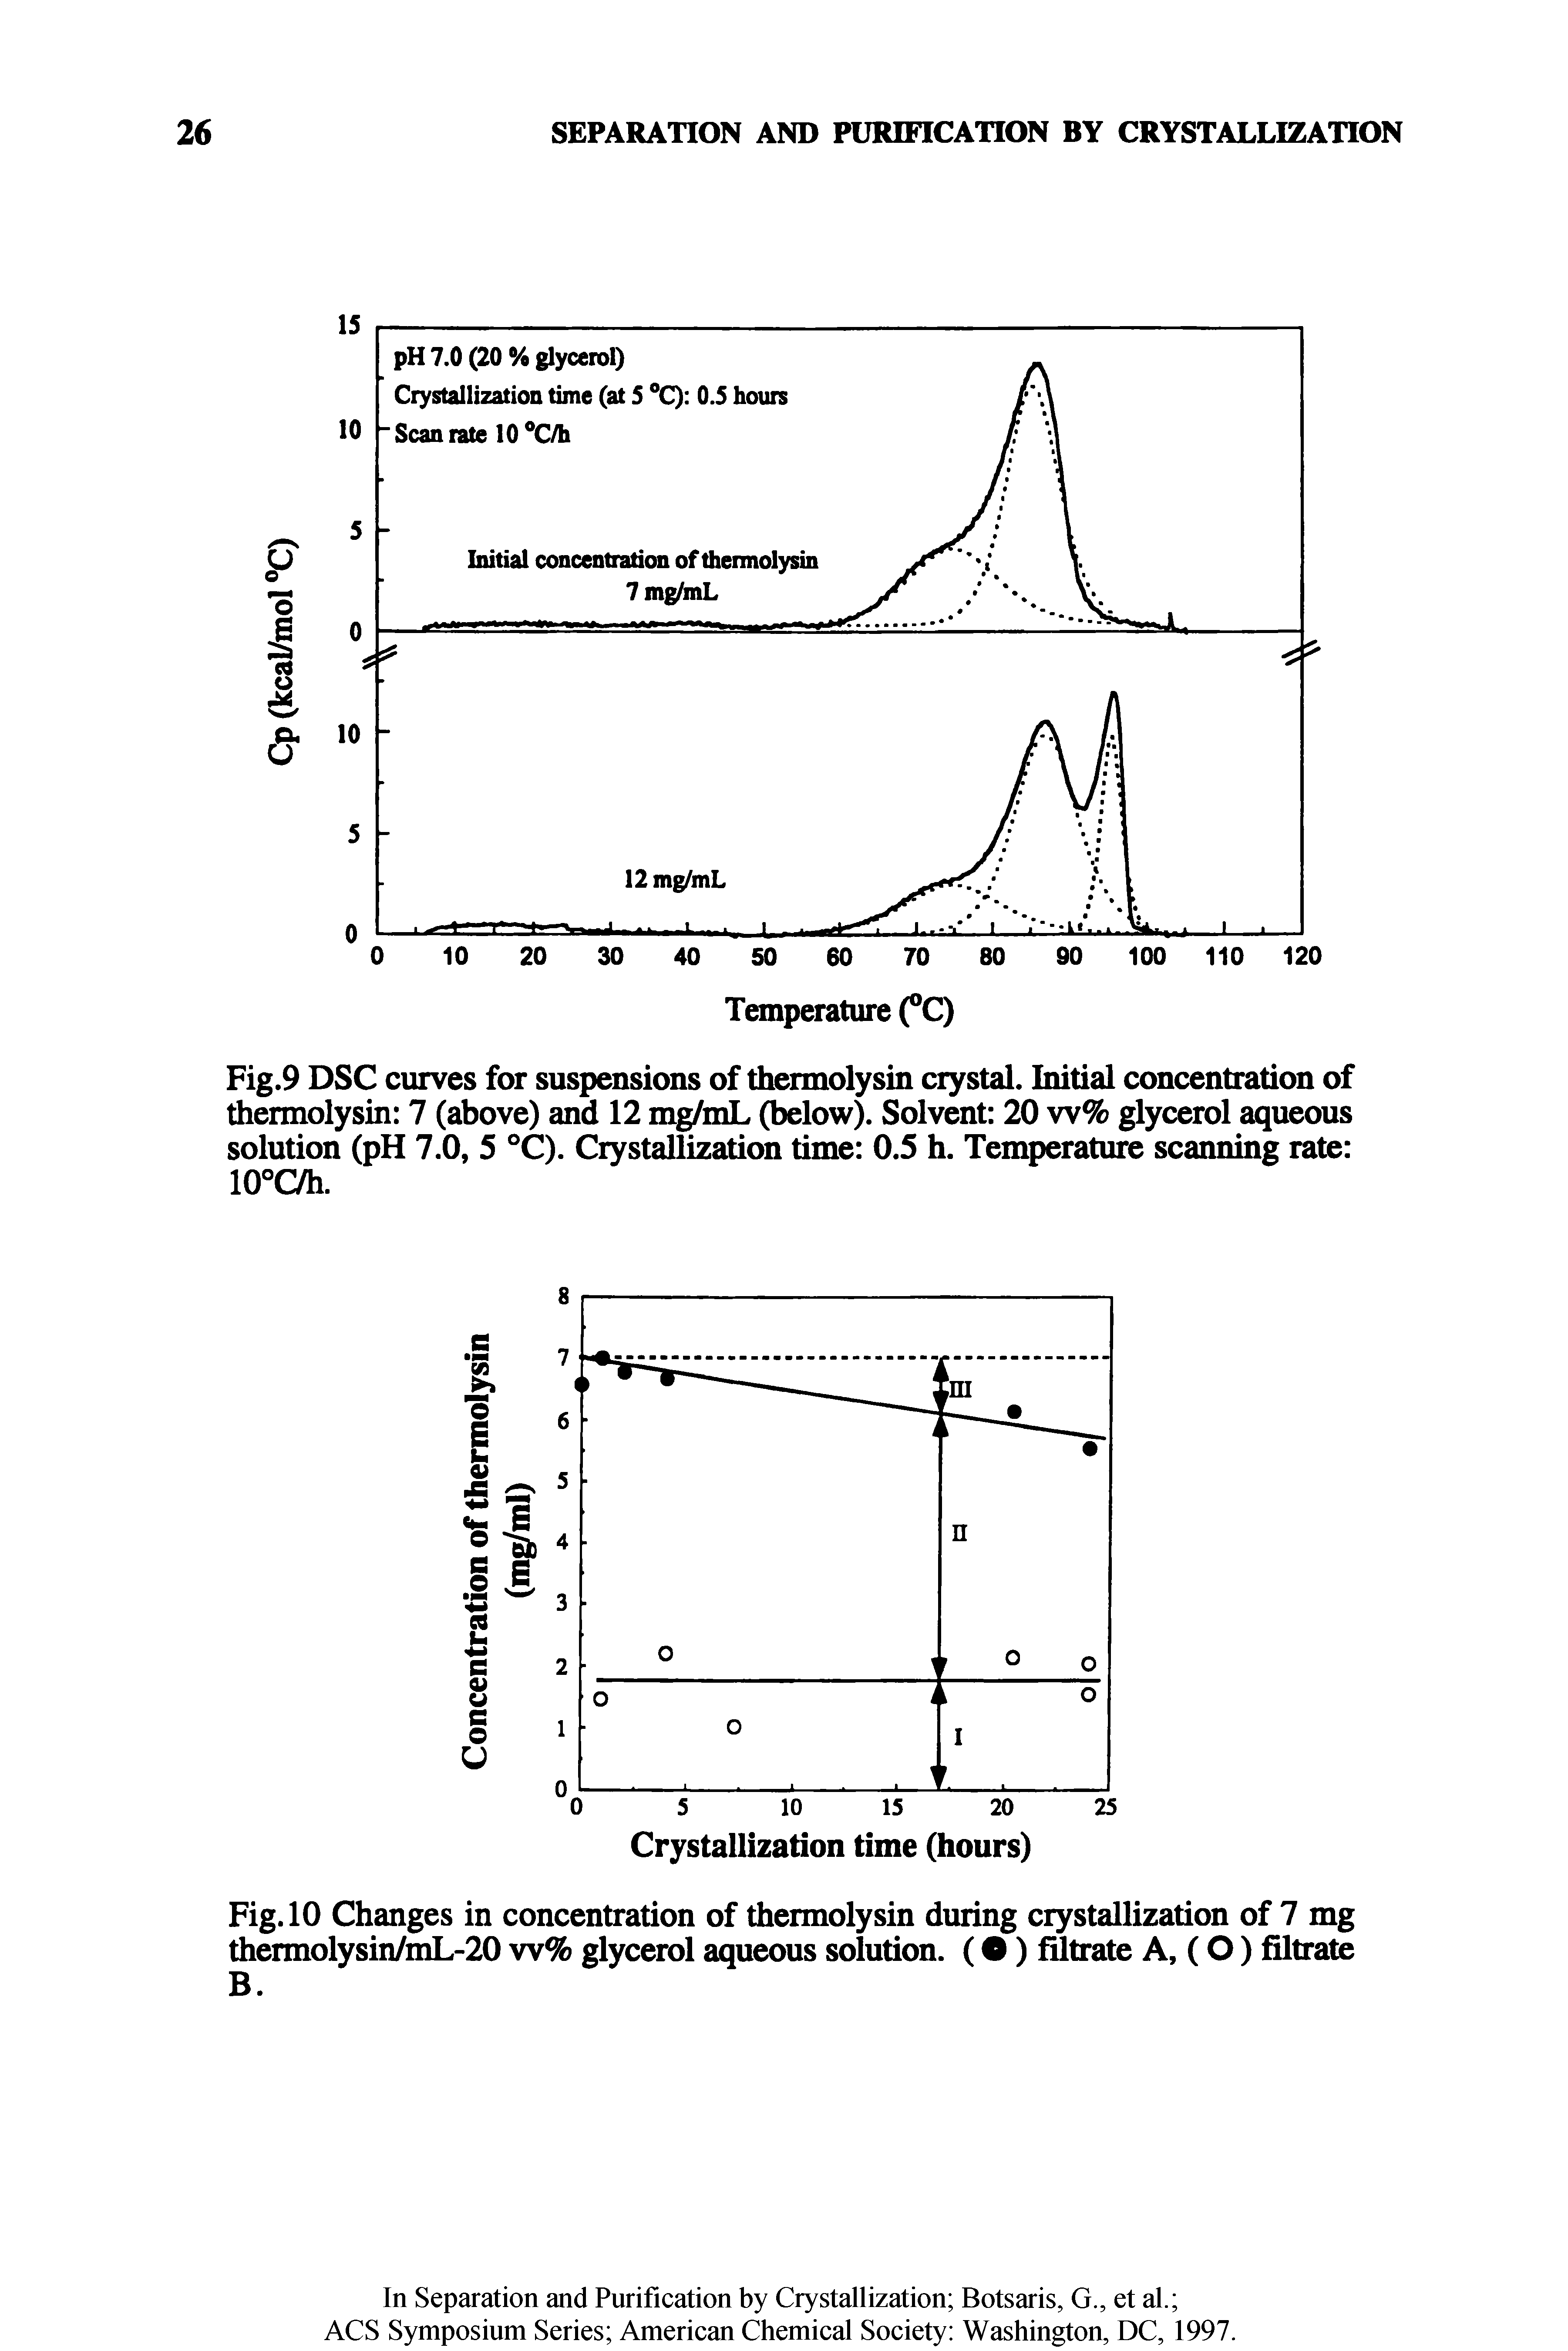 Fig.9 DSC curves for suspensions of thermolysin crystal. Initial concentration of thermolysin 7 (above) and 12 m mL (below). Solvent 20 w% glycerol aqueous solution (pH 7.0, 5 °C). Crystallization time 0.5 h. Temperature scanning rate 10°C/h.